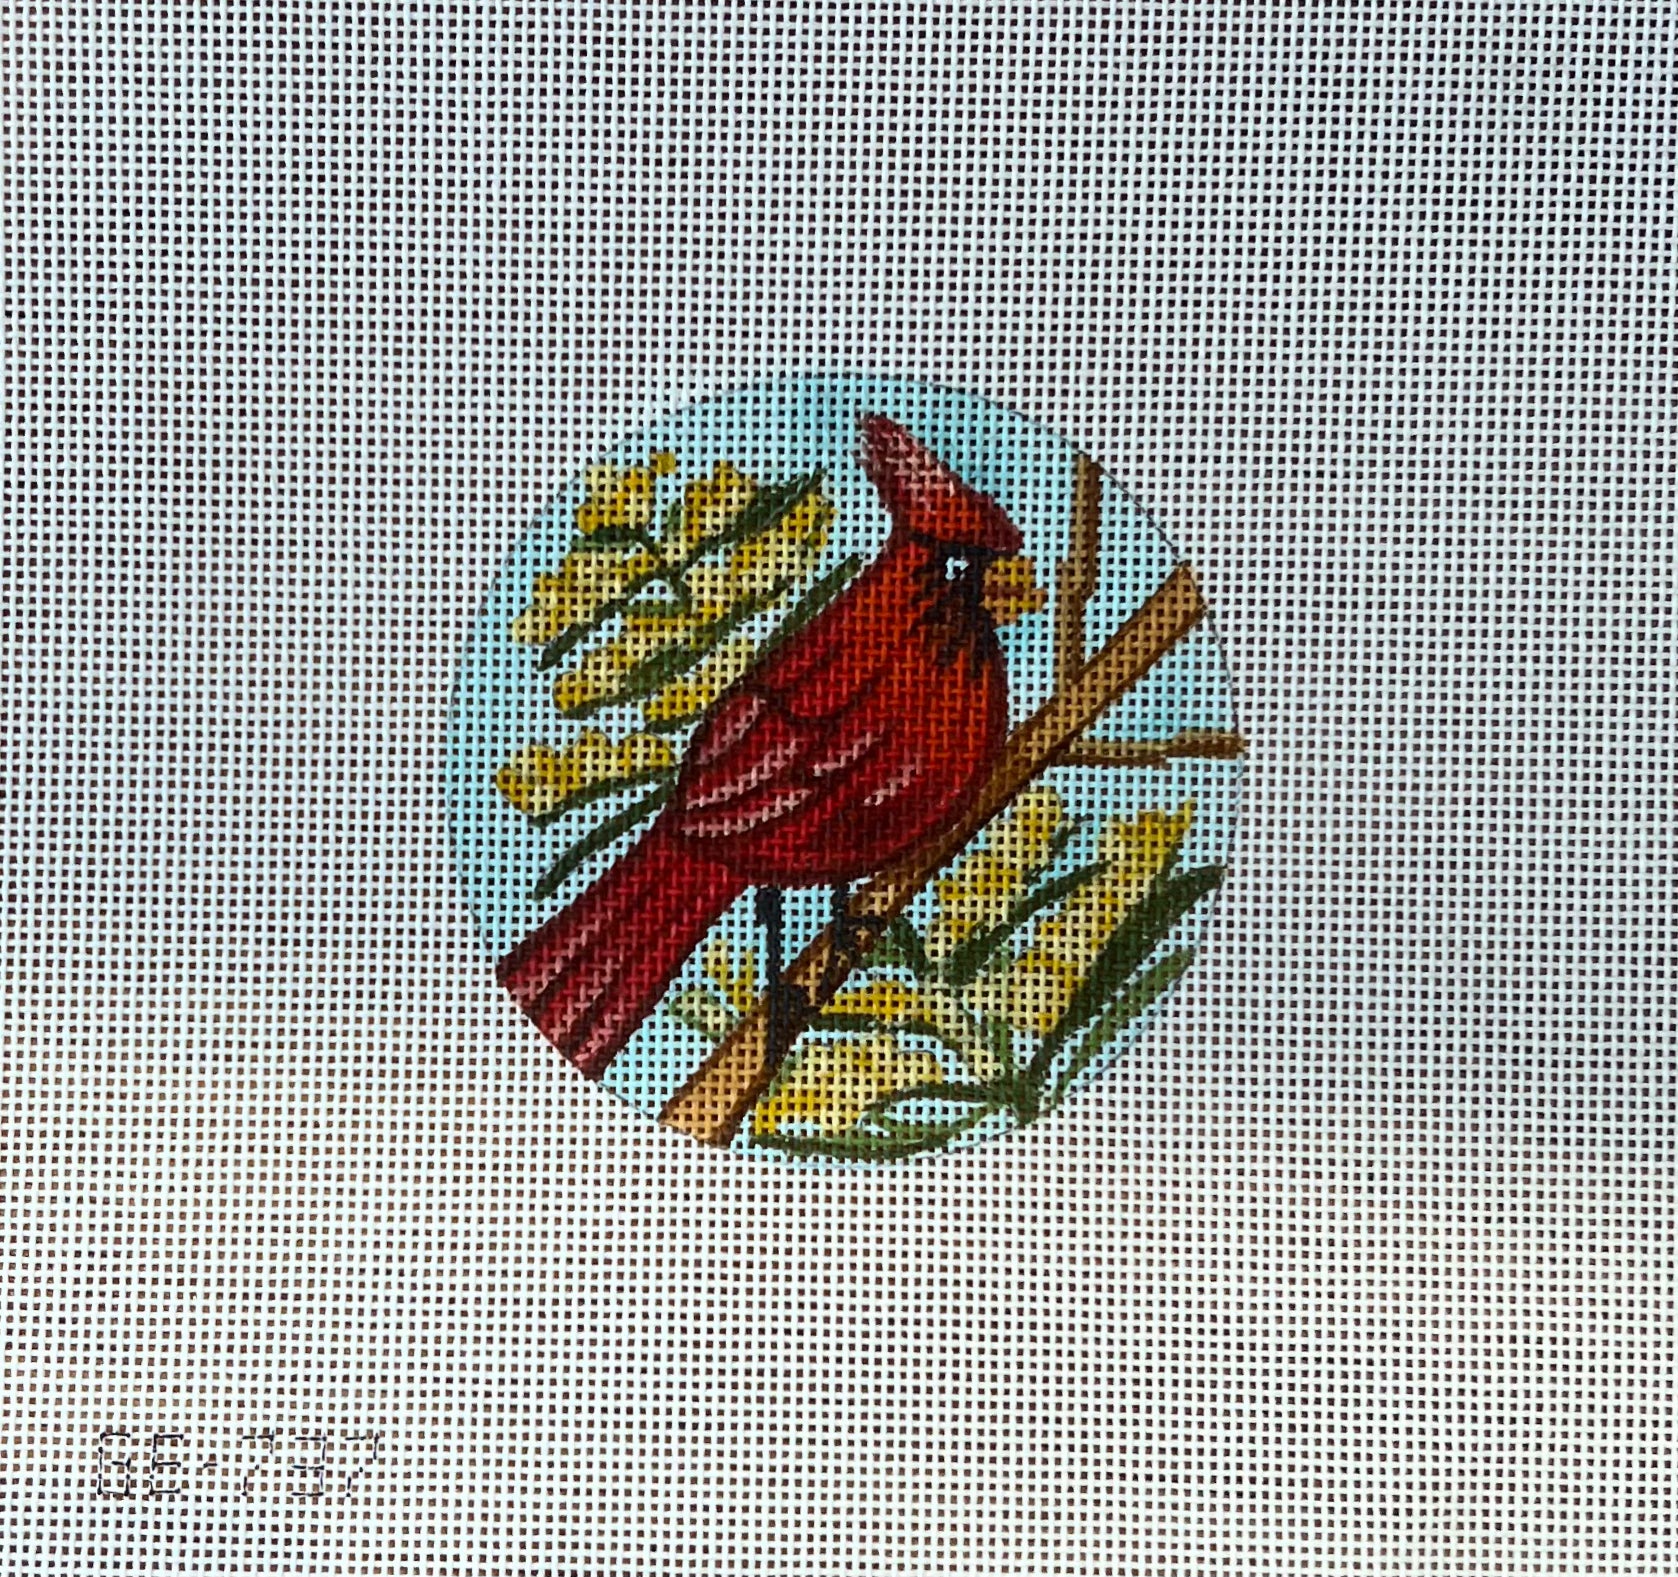 Cardinal Tree Topper hand-painted needlepoint stitching canvas, Needlepoint Canvases & Threads